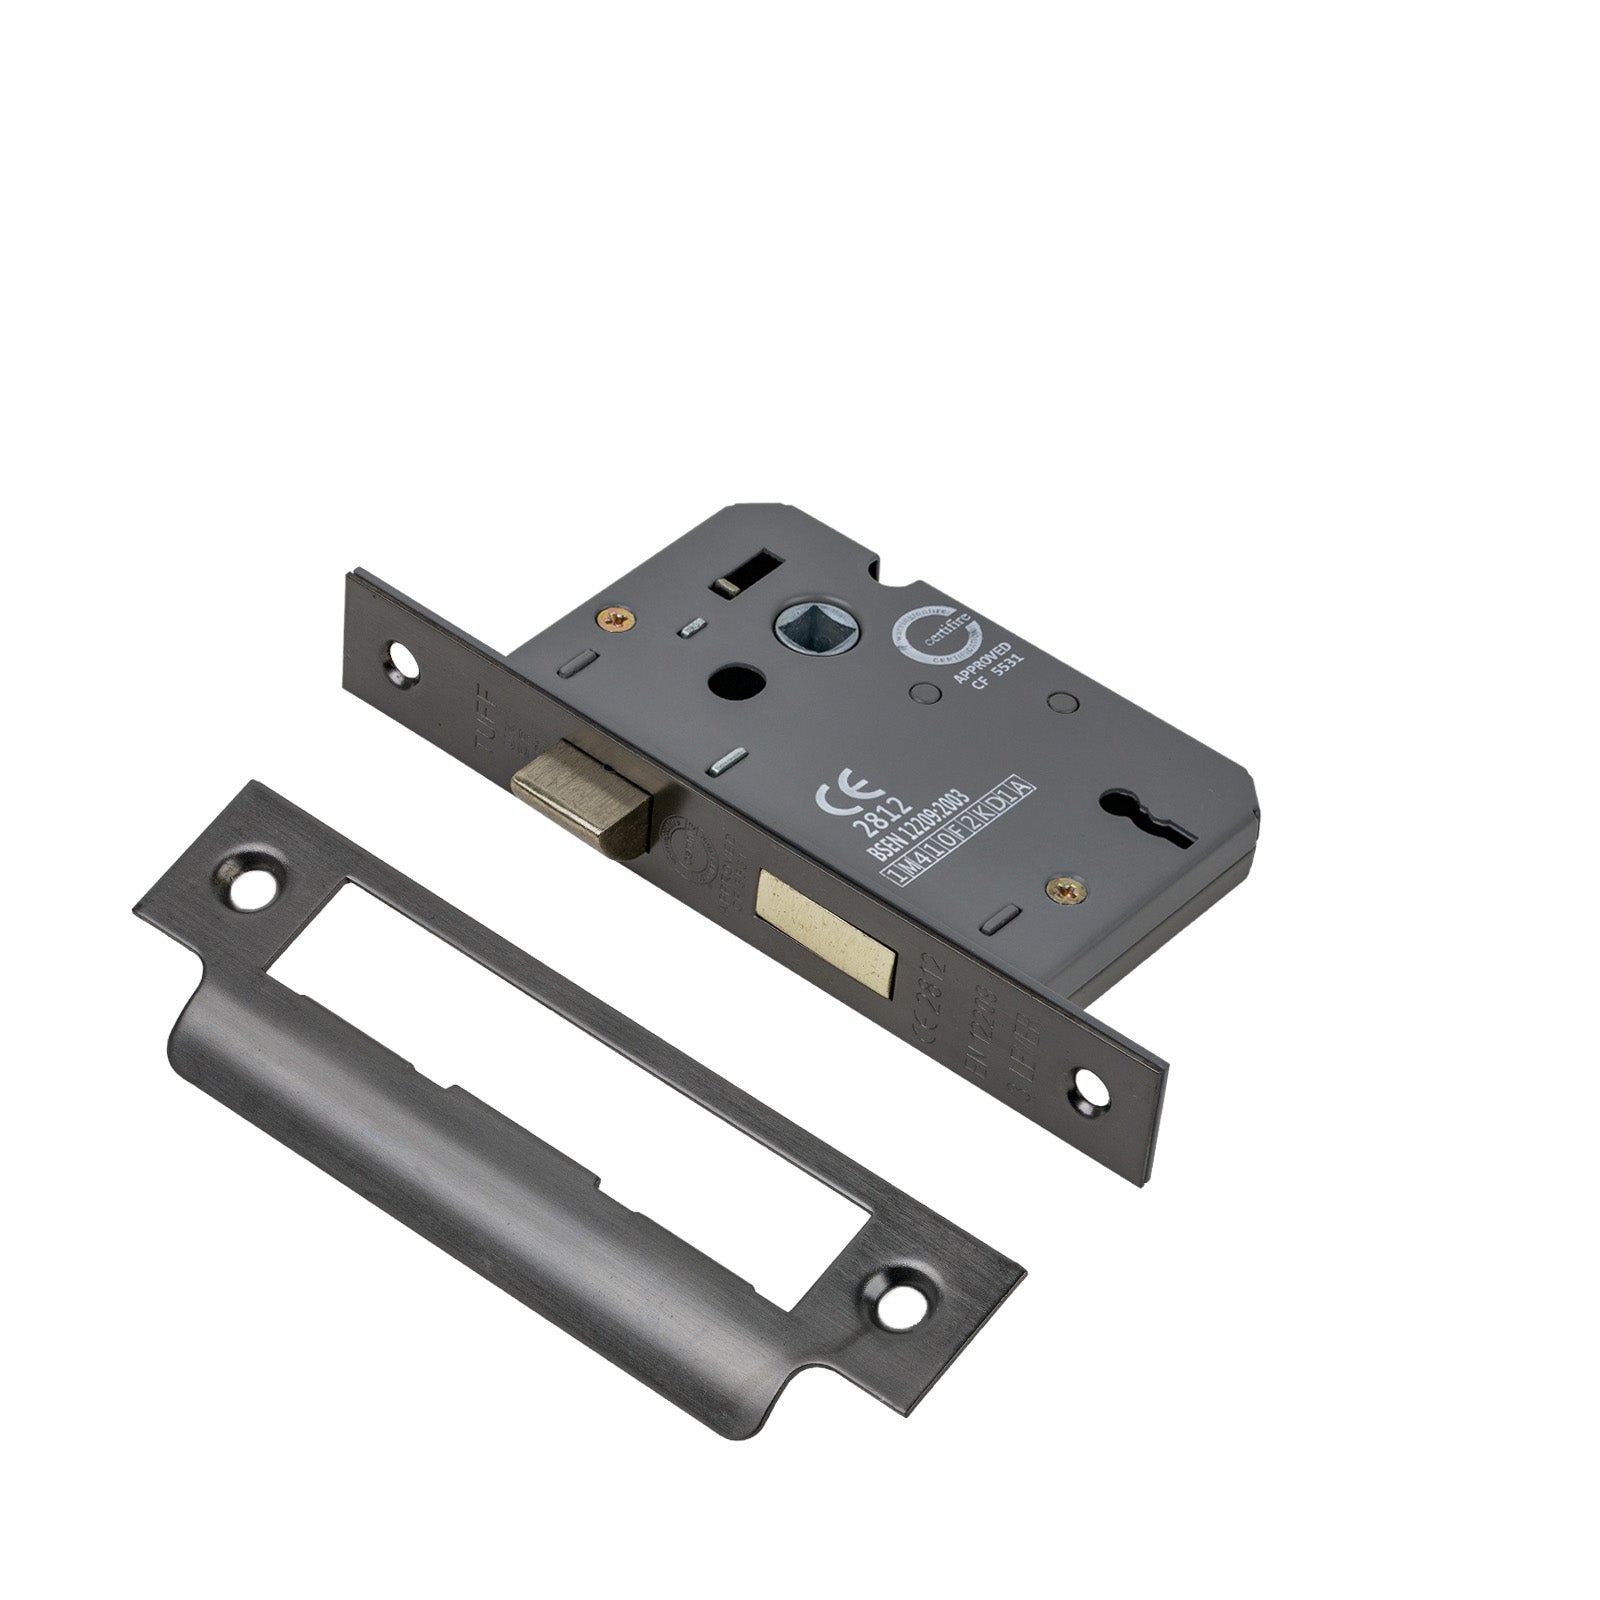 SHOW 3 Lever Sash Lock - 2.5 Inch with Matt Gun Metal finished forend and striker plate